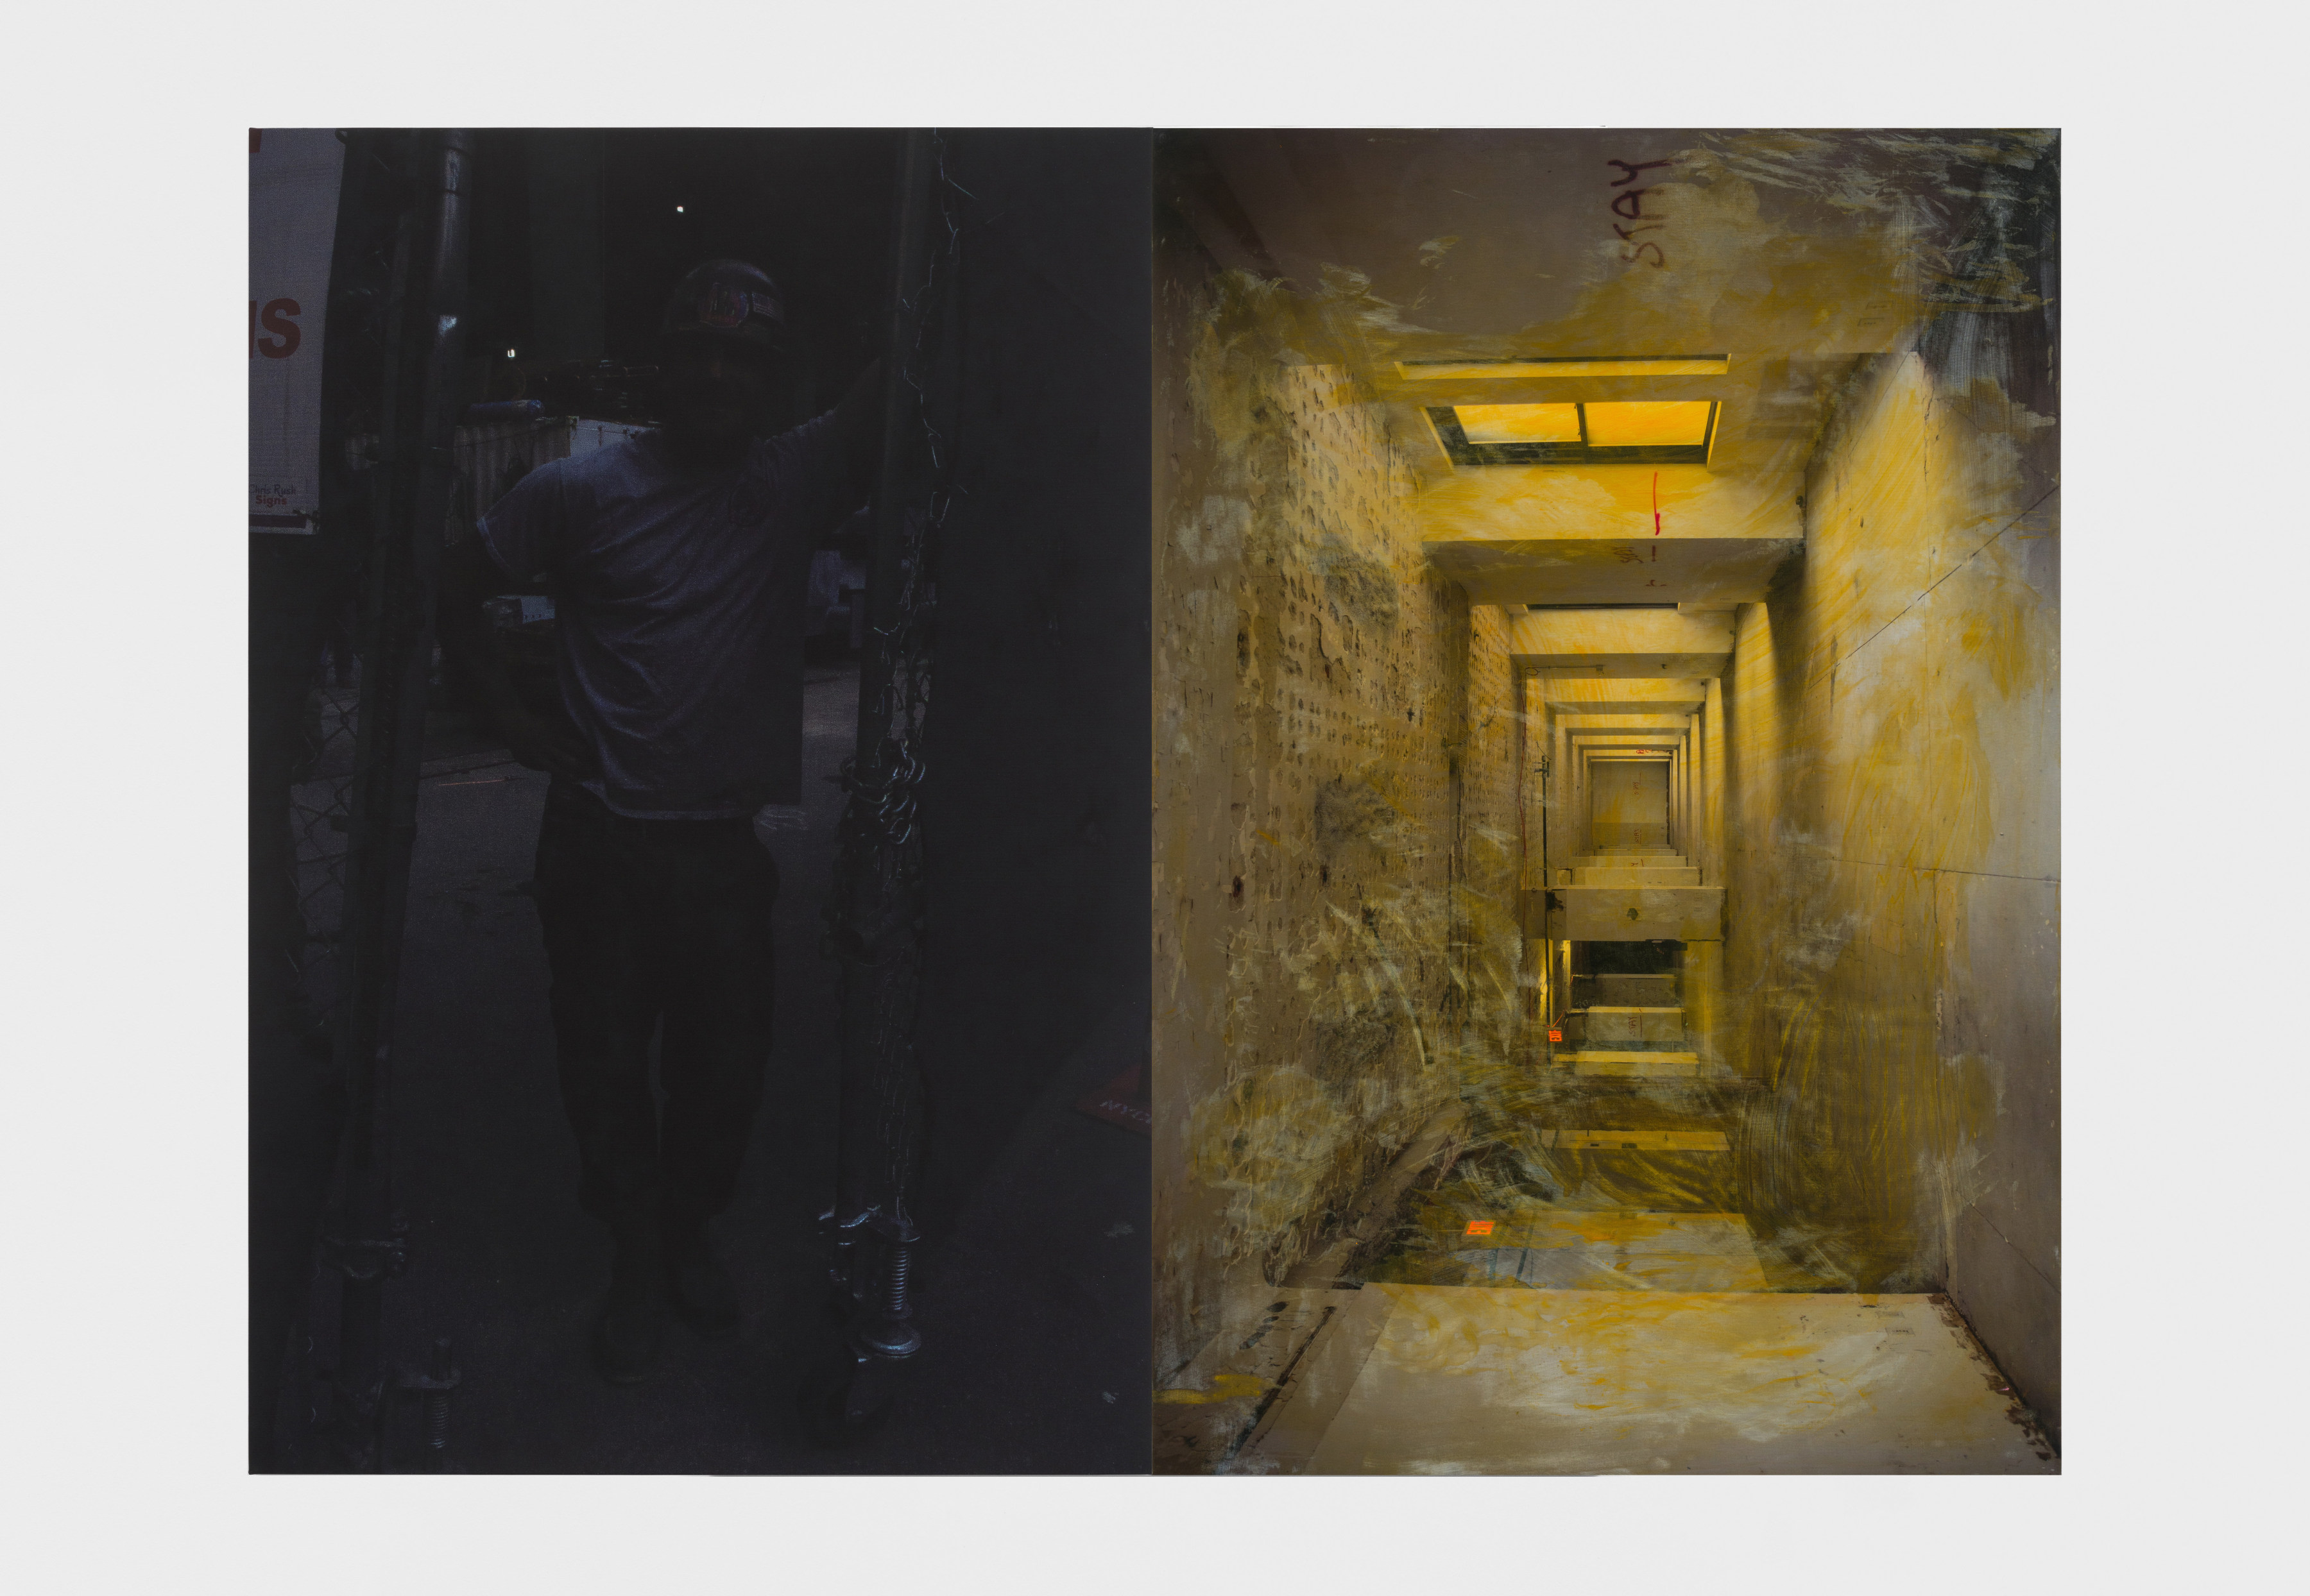 A panel of two photographs depicting a construction worker leaning against a wire fence and a yellow toned image of a partially demolished hallway flipped sideways.